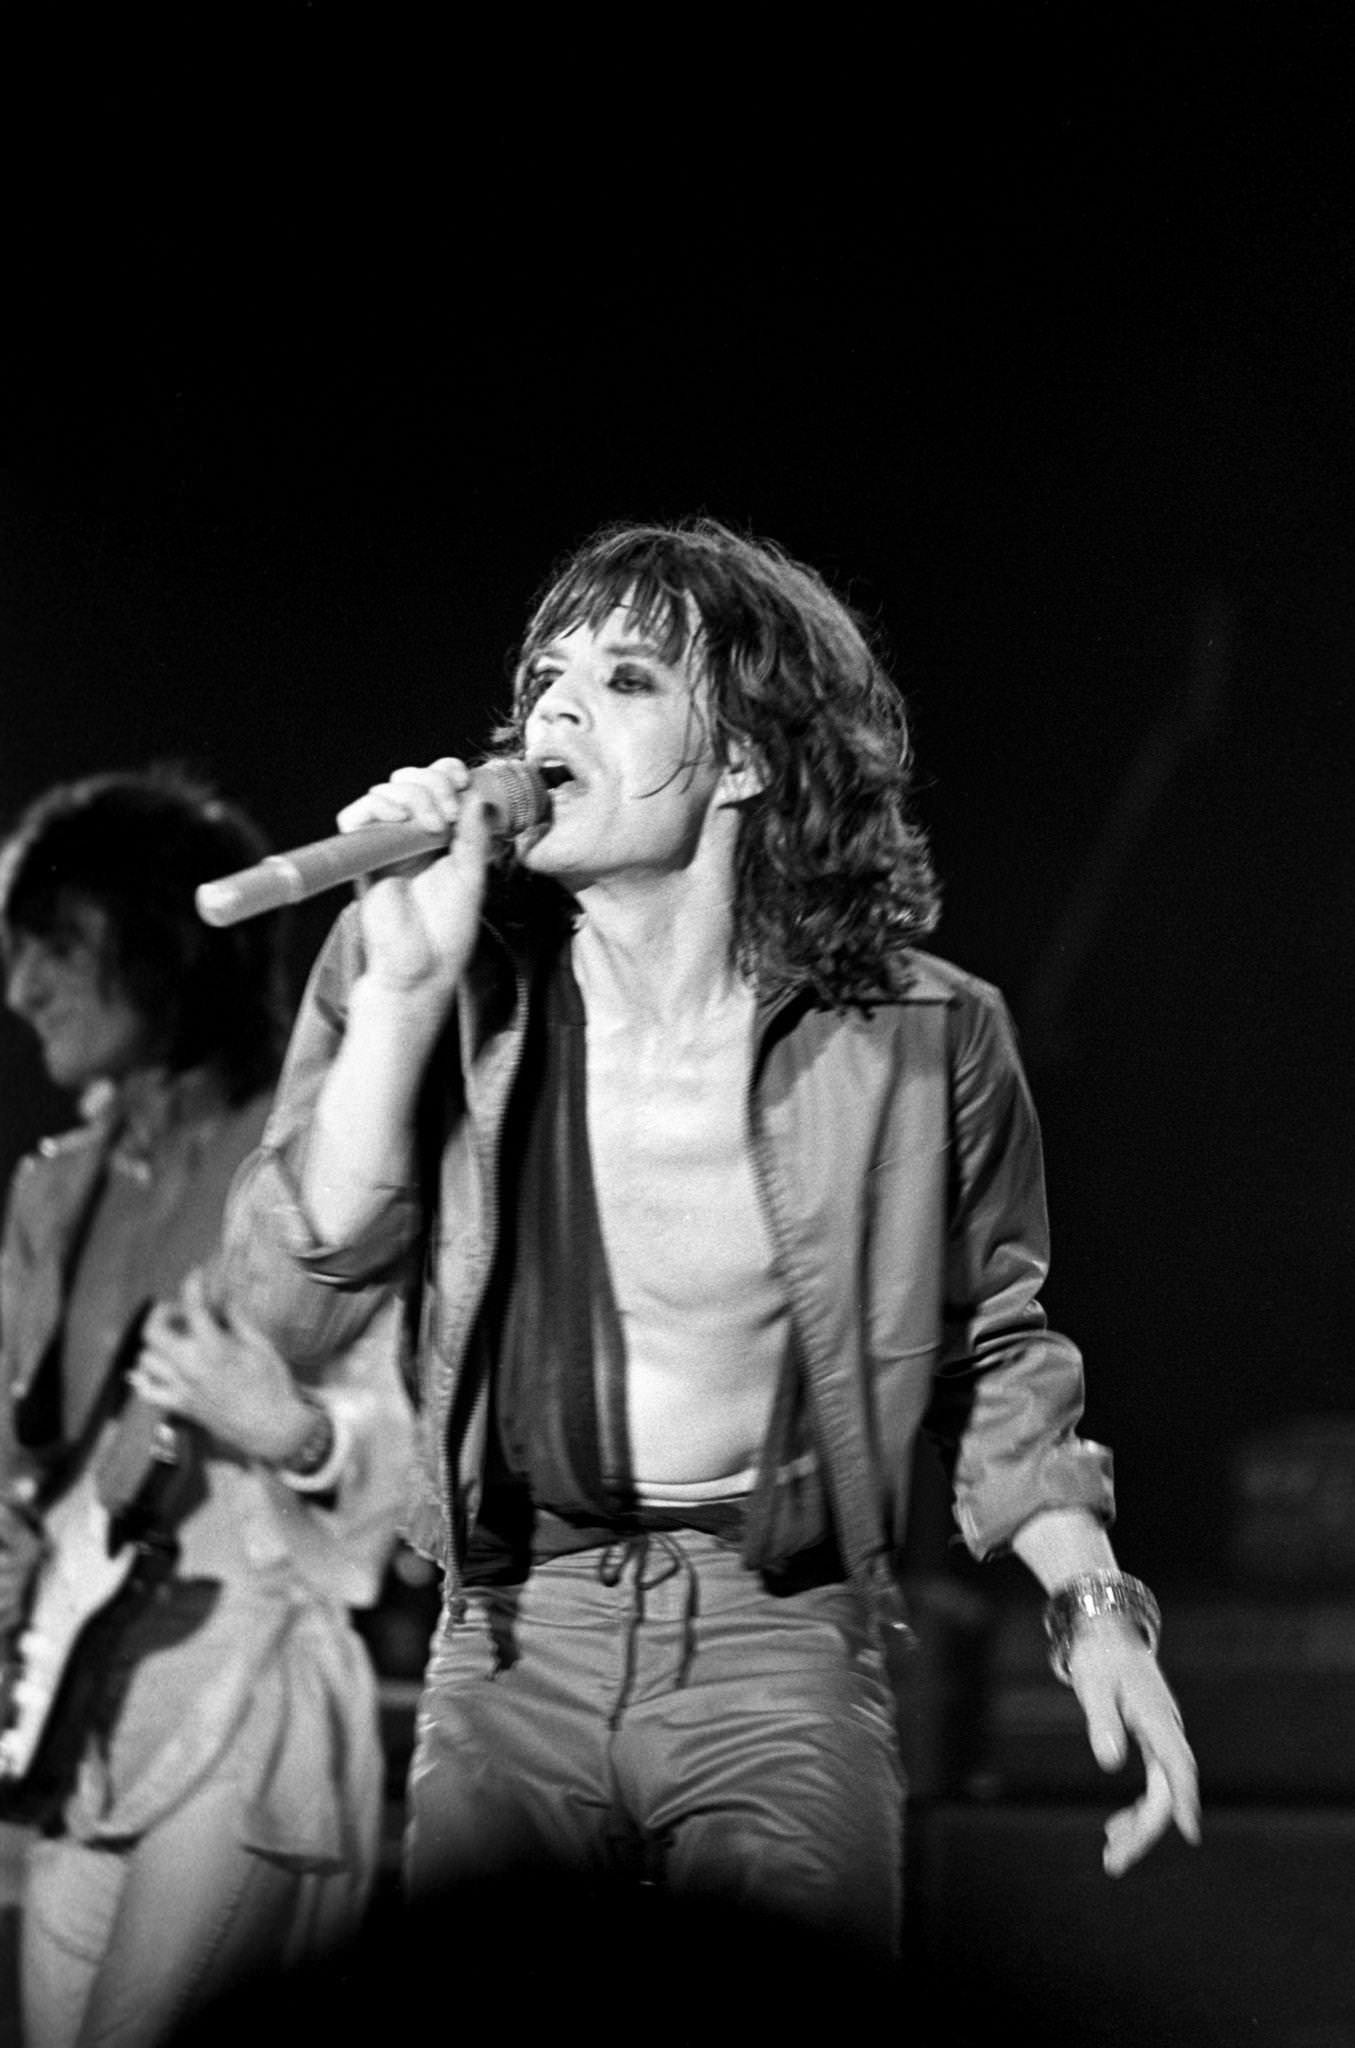 Mick Jagger performs with Ronnie Wood at Madison Square Garden during the band's "Tour of America '75" on June 25, 1975, in New York, New York.